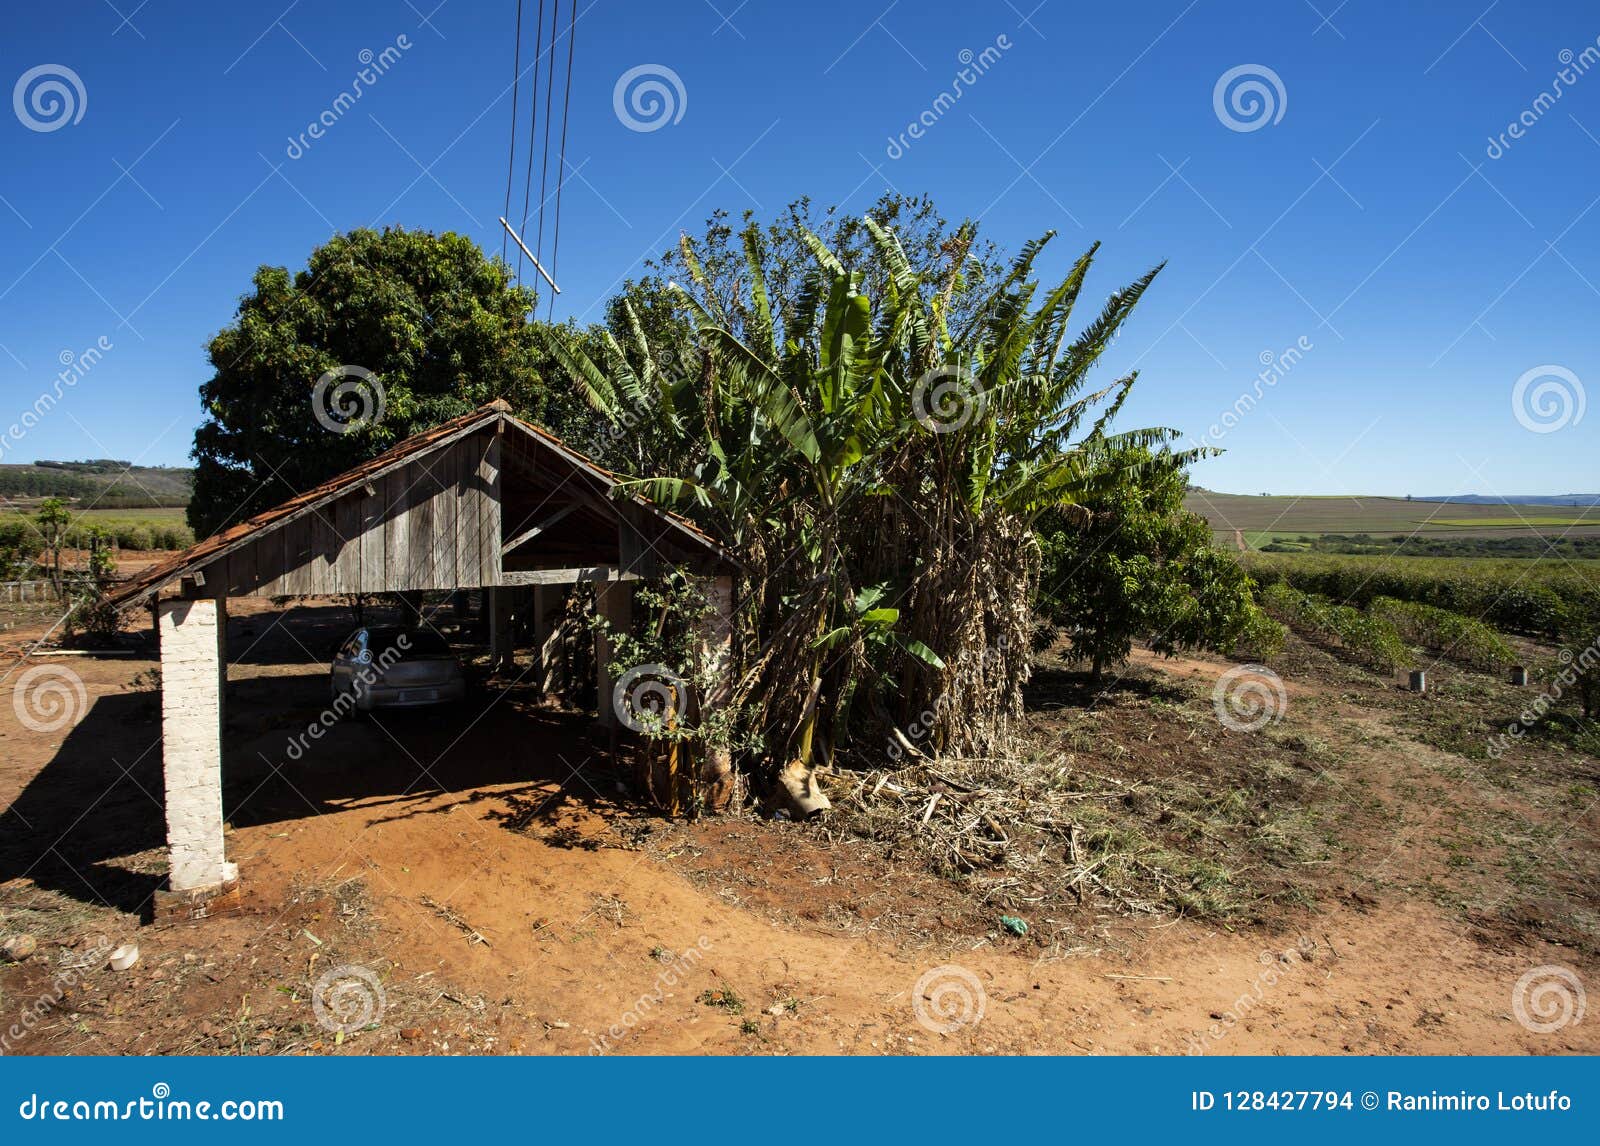 fotos - simple farm house. brick house, red roof, red earth farm, brazil.